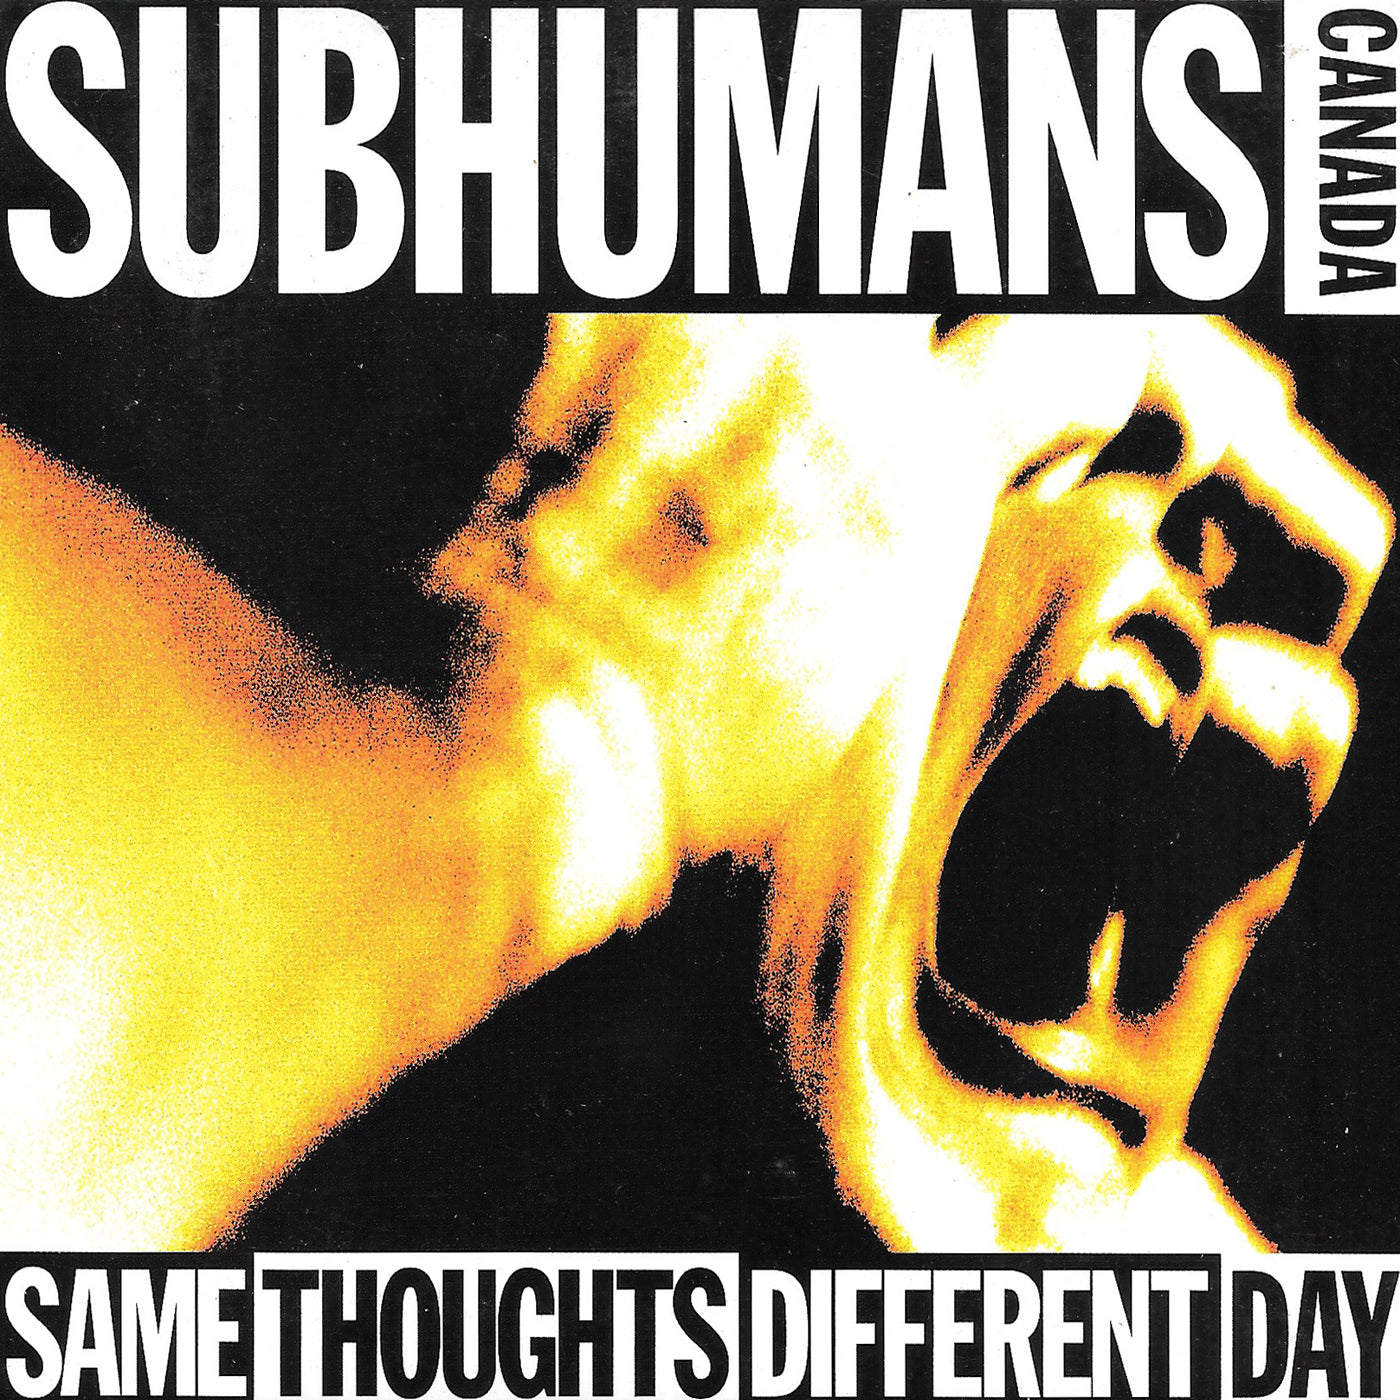 v404 - Subhumans Canada - "Same Thoughts Different Day"